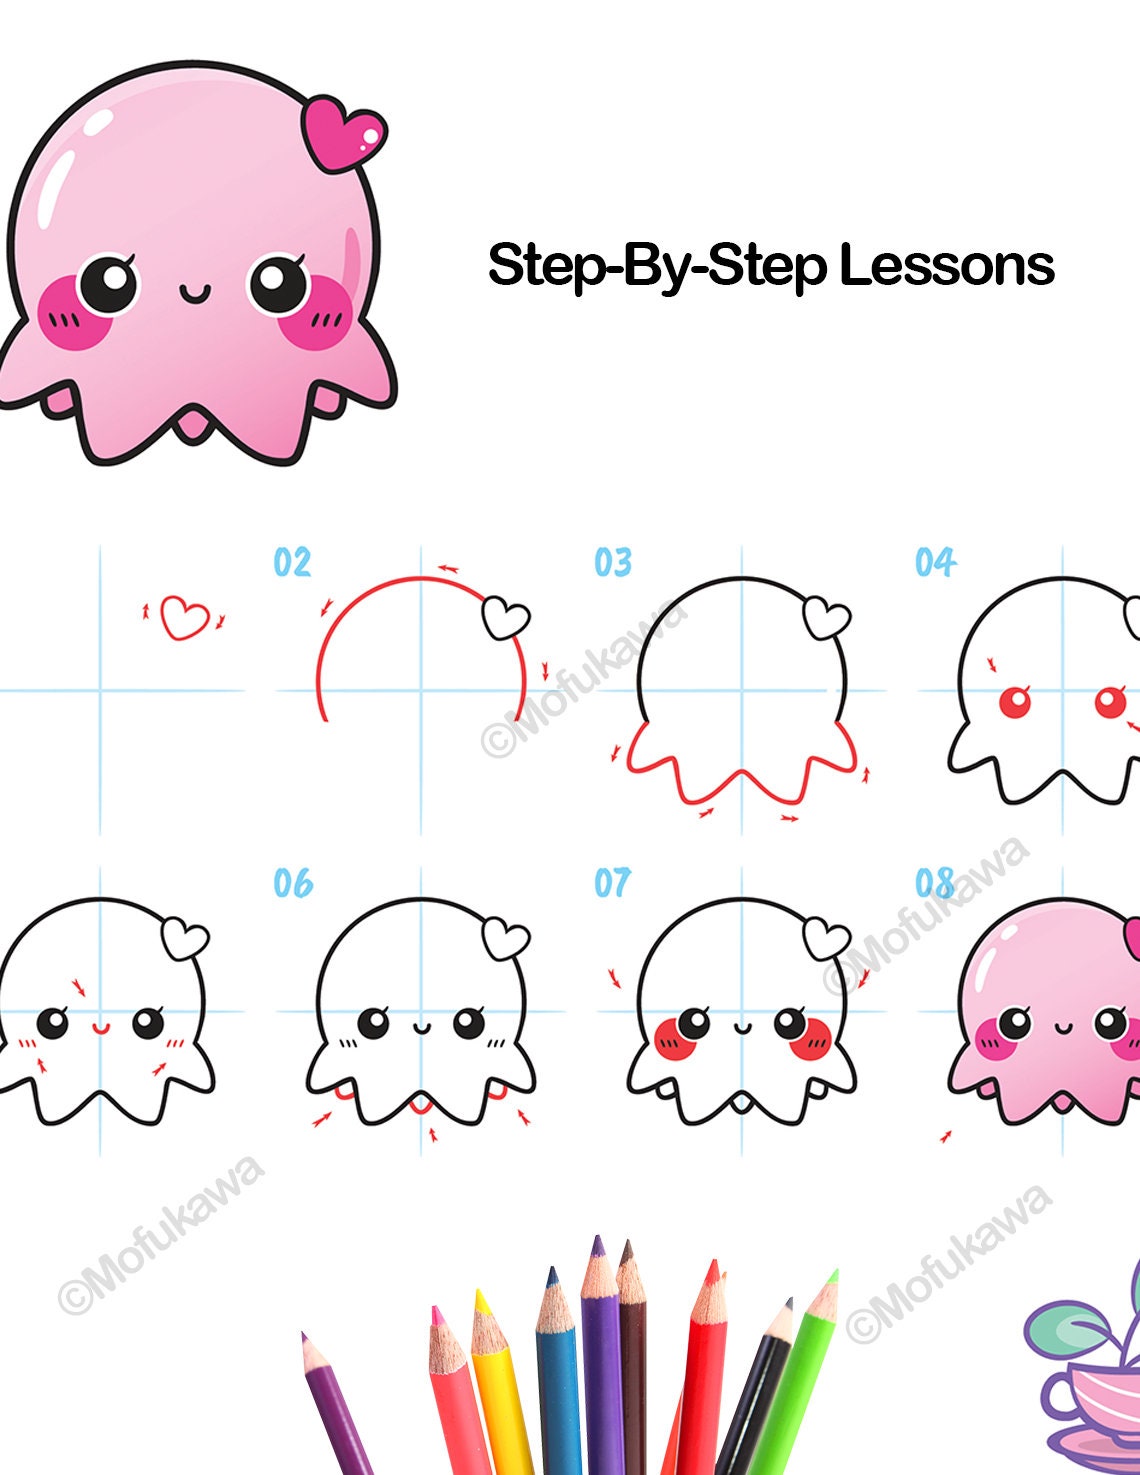 How to Draw Accessories for Kawaii Drawings to Tell a Story